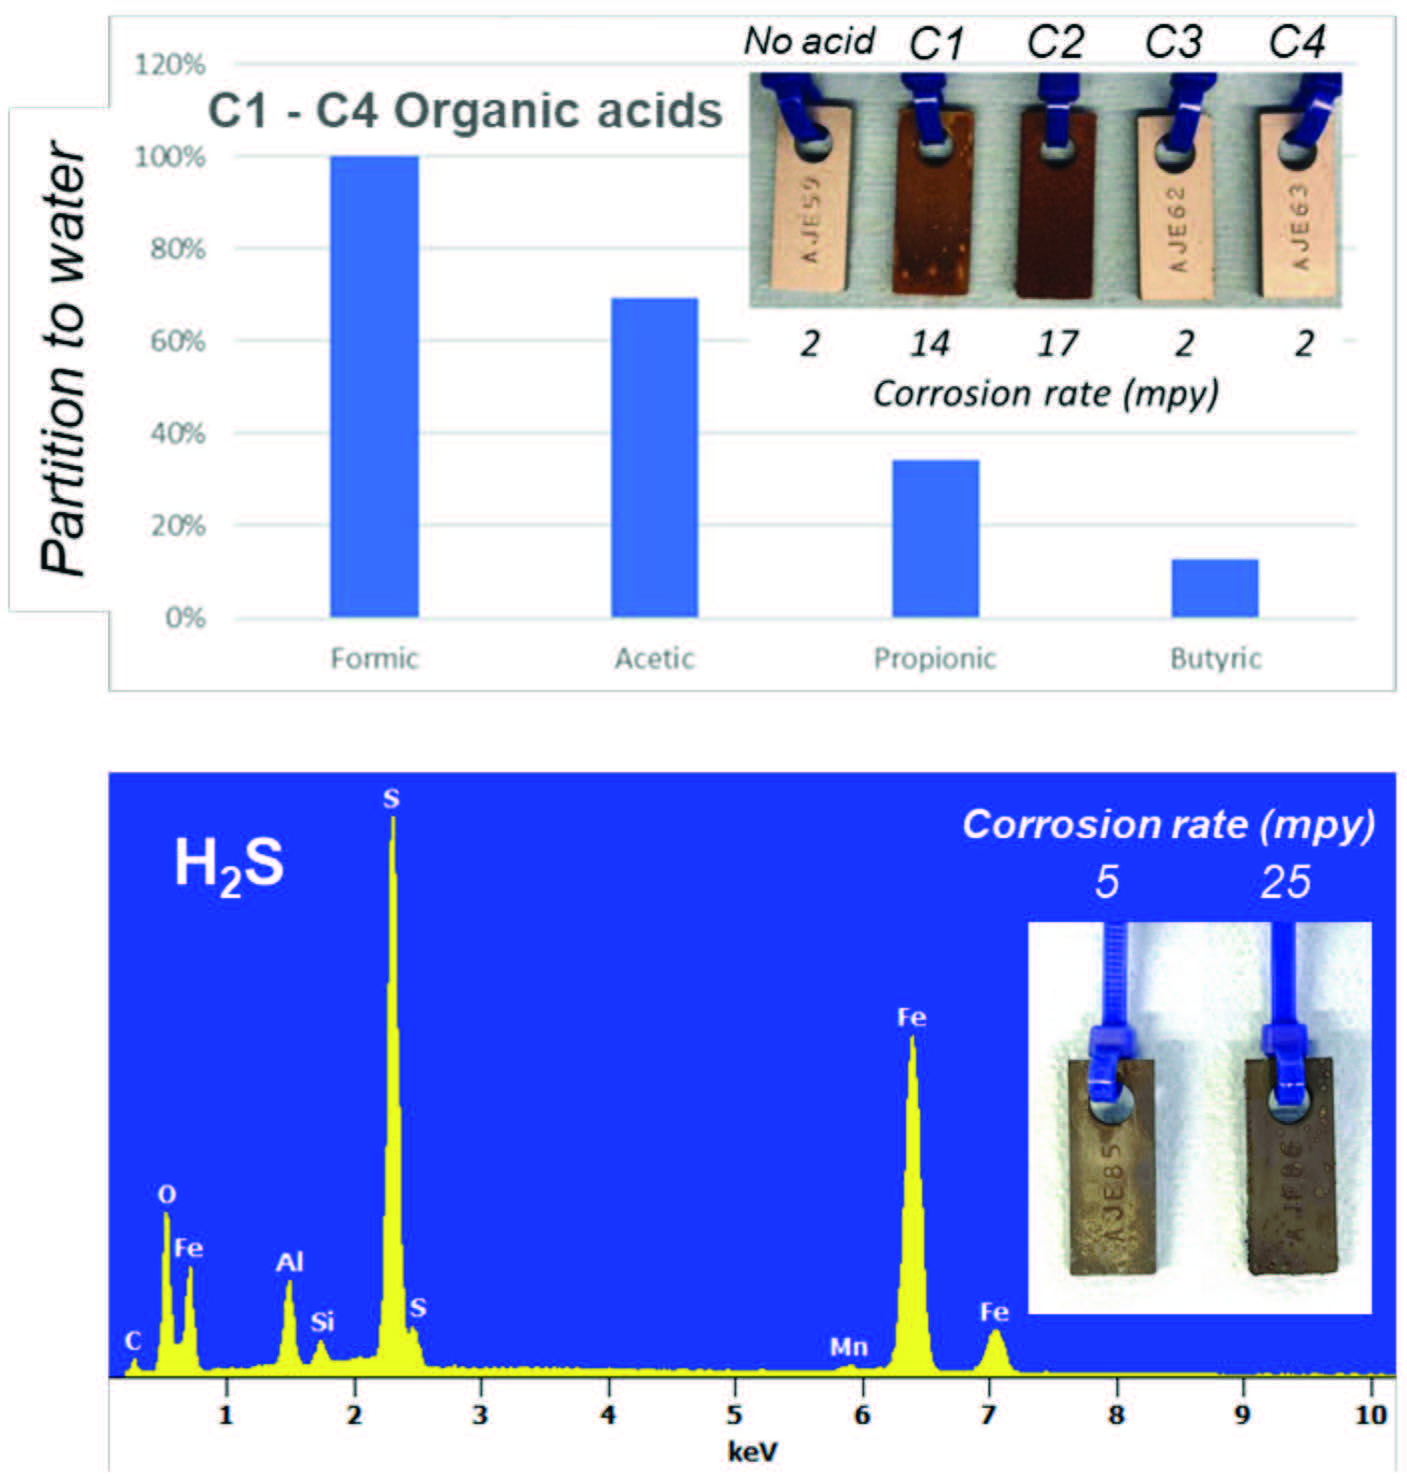 FIGURE 4 Top. Impact of organic acid homologous series on nucleation corrosion. All acids were tested at equimolar acid concentration corresponding to 100 ppm acetic acid. Insert shows post-corrosion coupon pictures and corresponding corrosion rates for blank, formic, acetic, propionic, and butyric acid samples from left to right. Bottom: SEM-EDS spectra of the corrosion products due to nucleation corrosion from H2S-laden fluids showing the dominant corrosion product to be iron sulfide (% atom = 43% Fe, 34% S, and 23% O). Coupons were exposed to air during transport from bottles to the electron microscope.